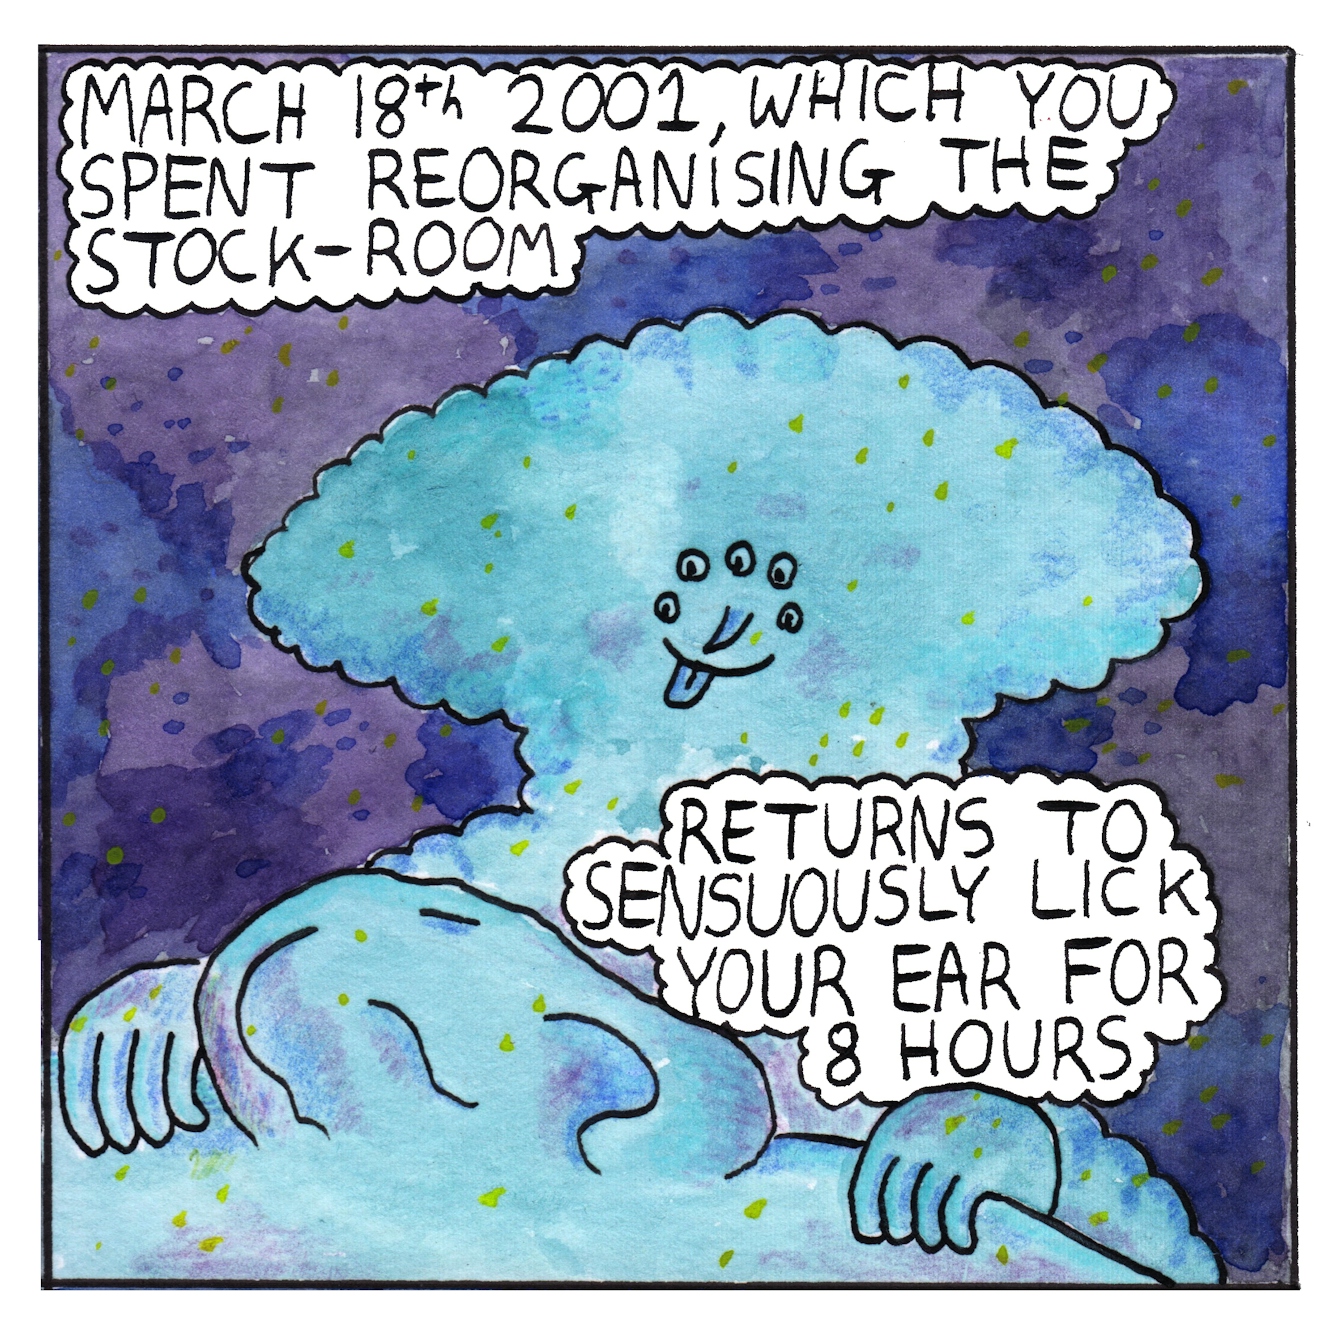 Panel two of a six-panel comic made with ink, watercolour and colour pencils: In the same deep-space background a fluffy cloud creature with five eyes arranged in a semi-circle above a pointed nose stands smiling with their tongue hanging out. They are staring eagerly at a large ear, hands holding on either side of the ear. Two text bubbles reads: “March 18th 2001, which you spent reorganising the stock-room, returns to sensuously lick your ear for 8 hours”